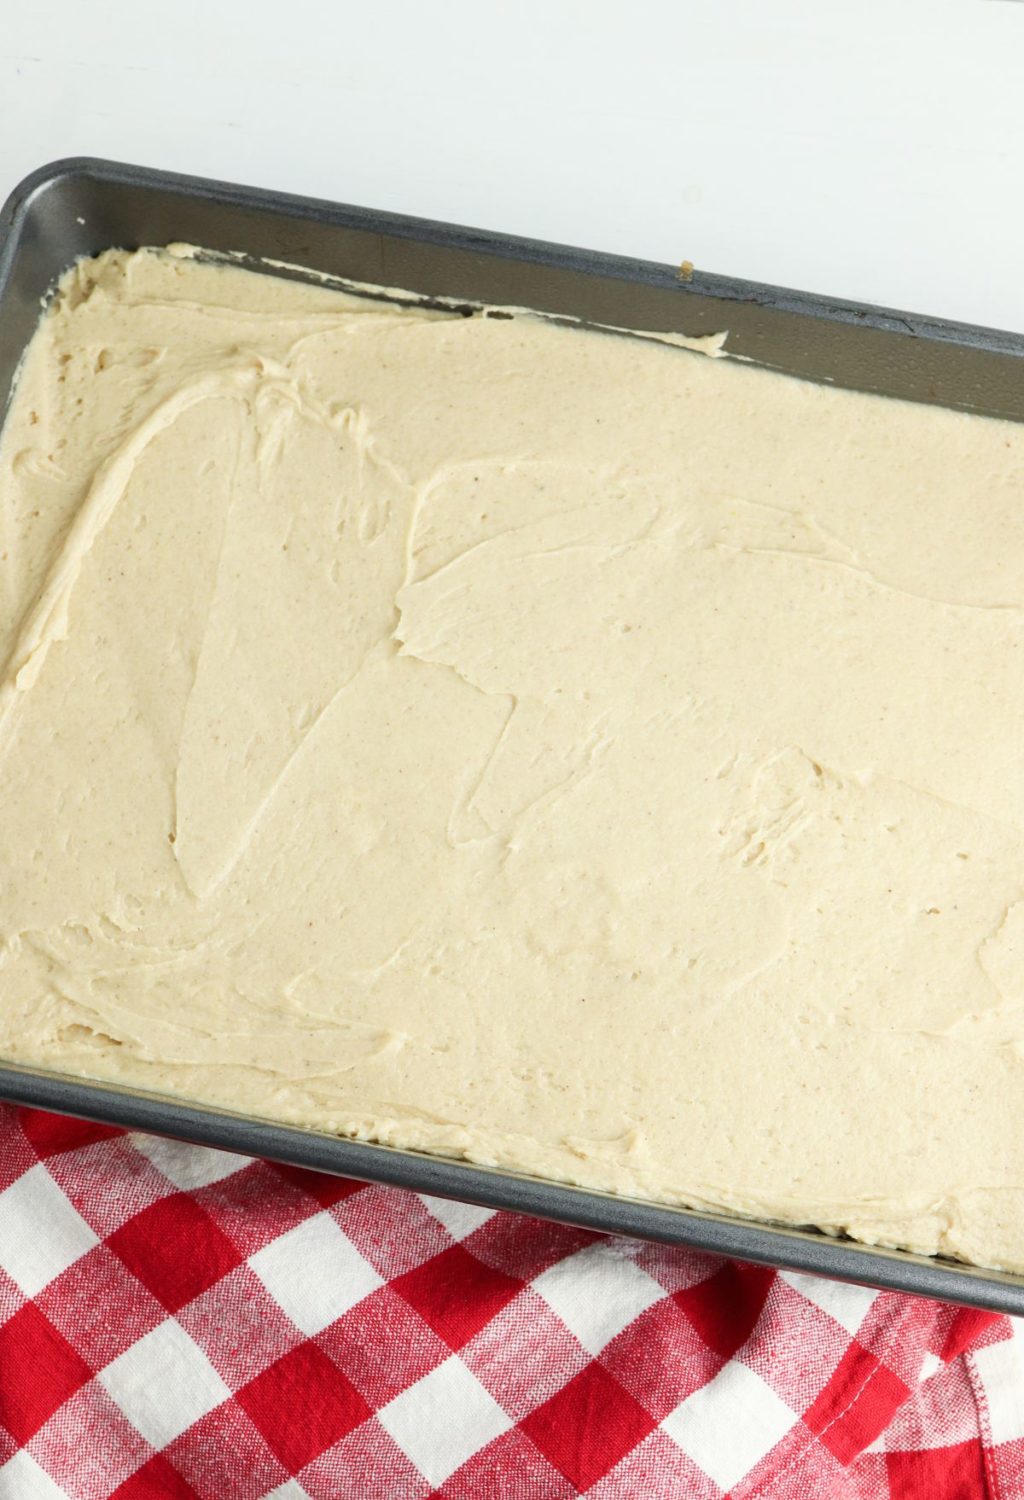 A pan with a layer of icing sitting on a red and white checkered tablecloth.